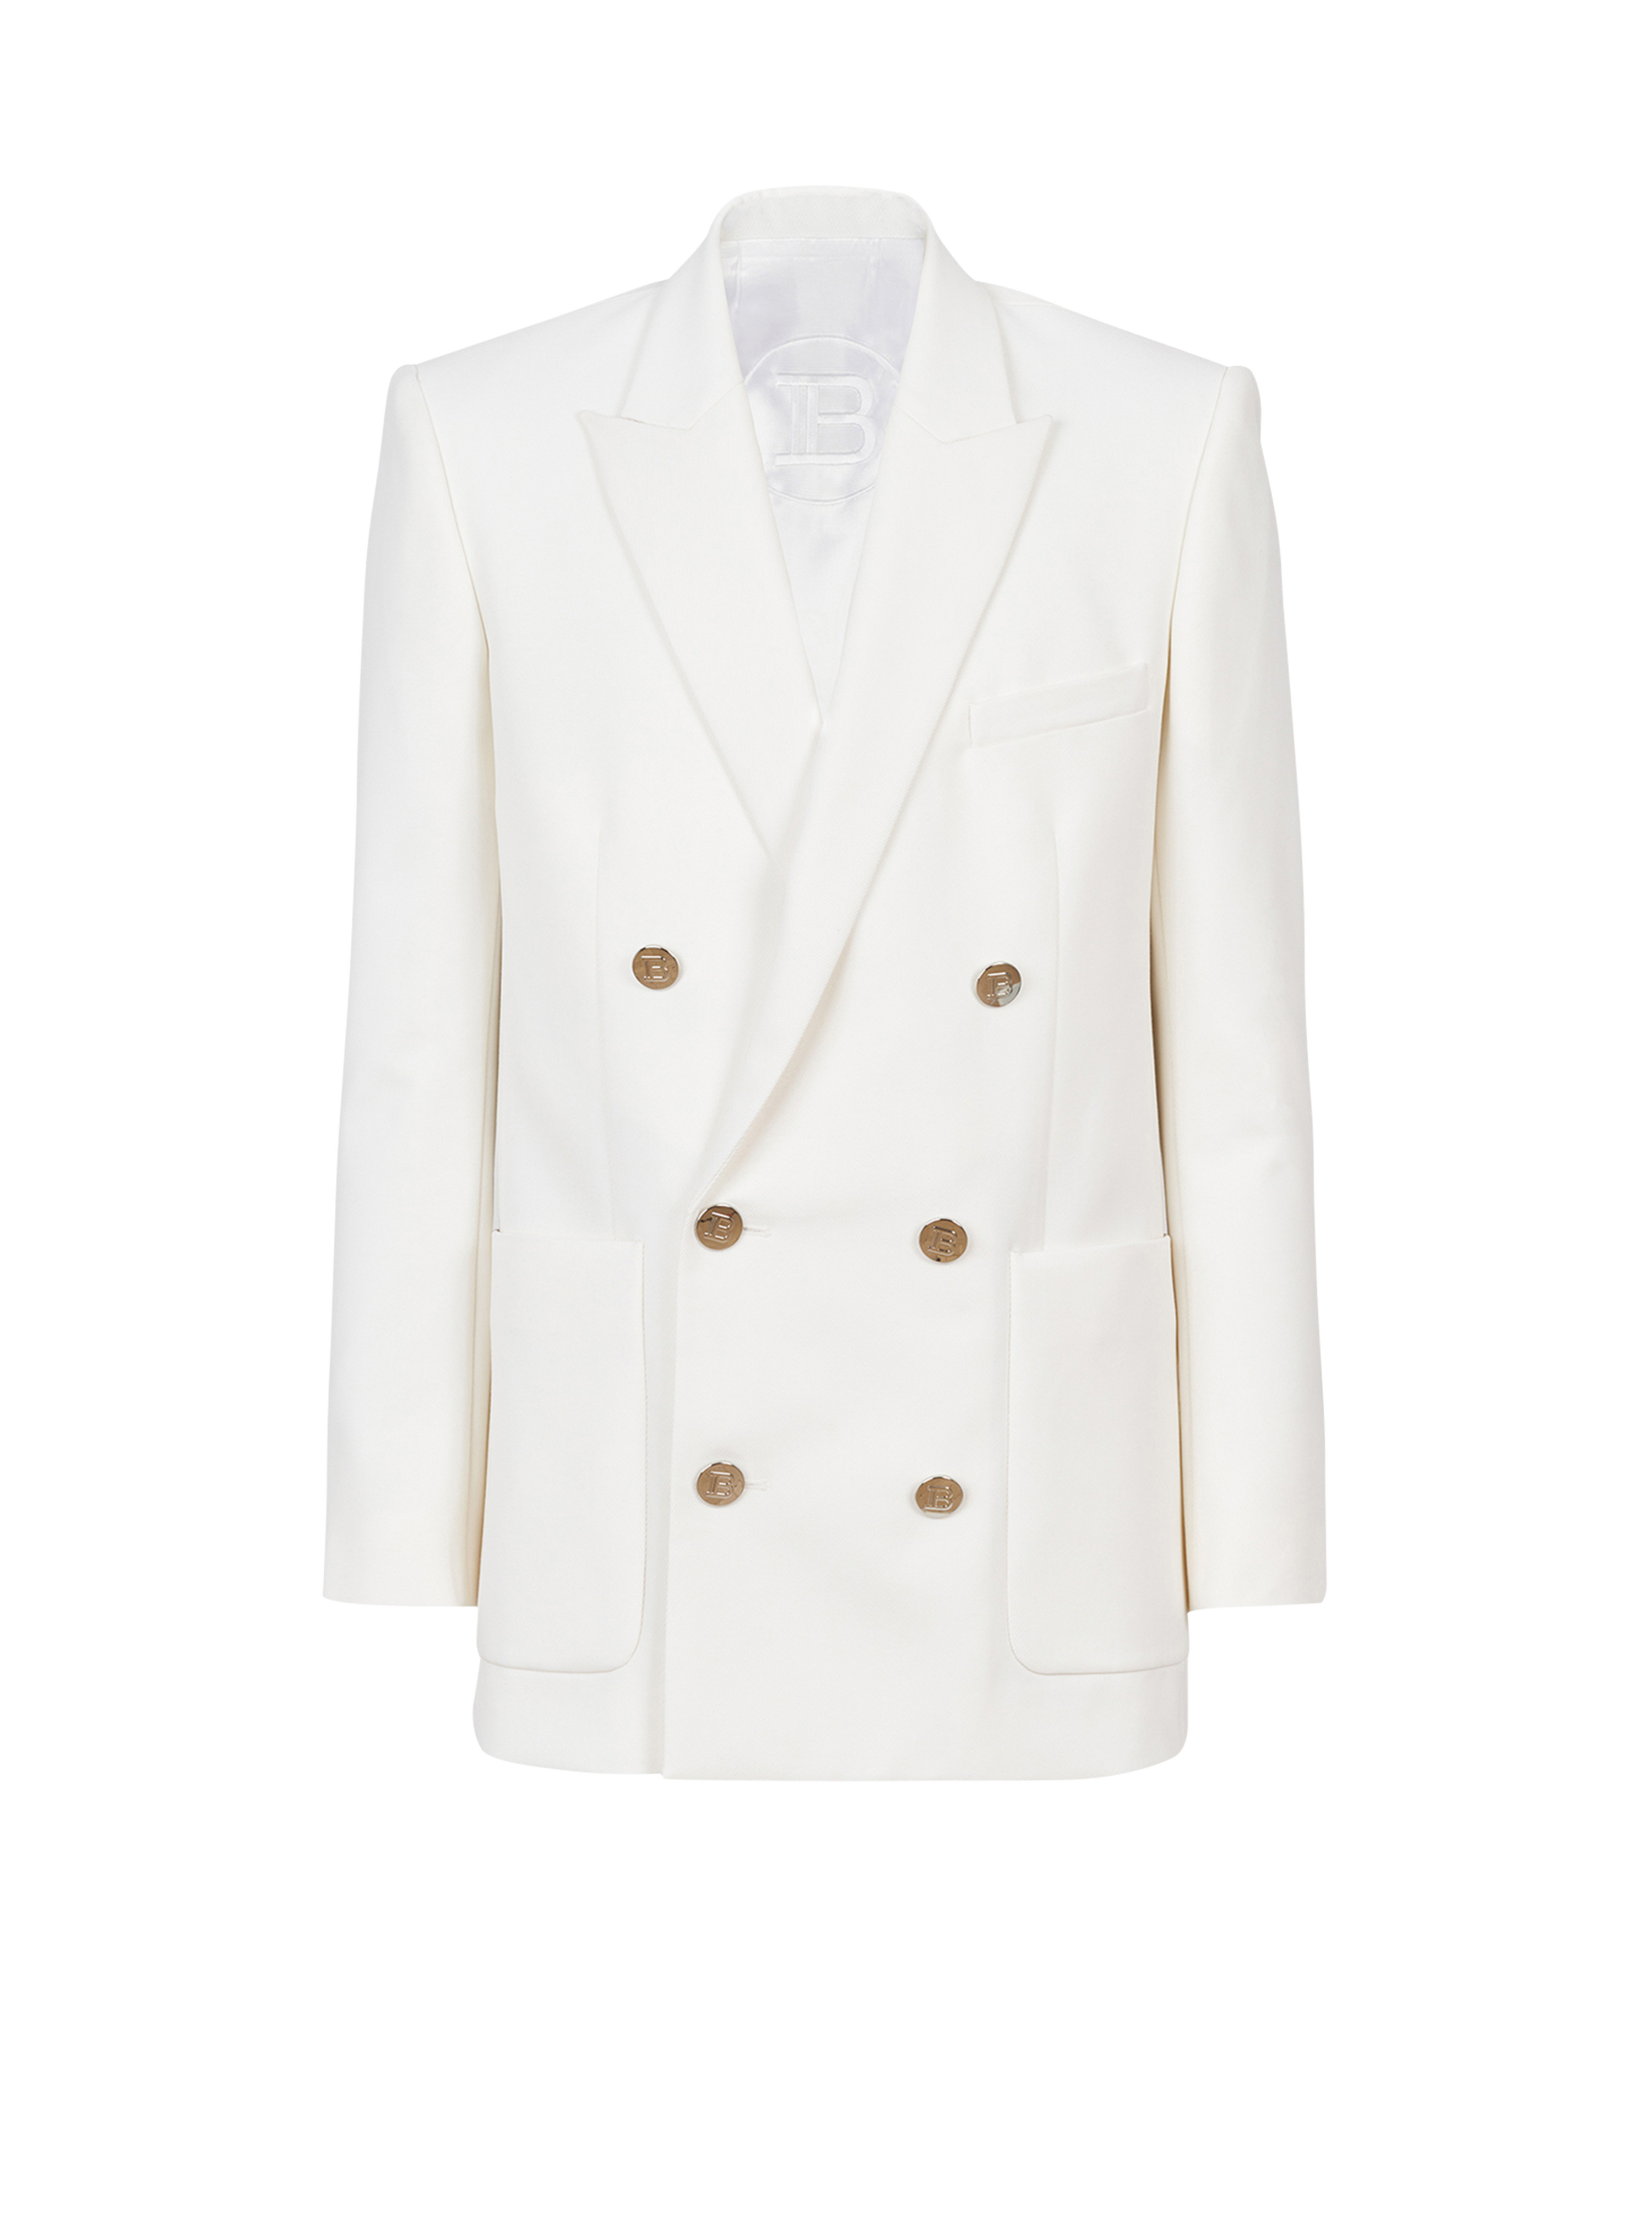 Twill blazer with double-breasted silver-tone buttoned fastening, white